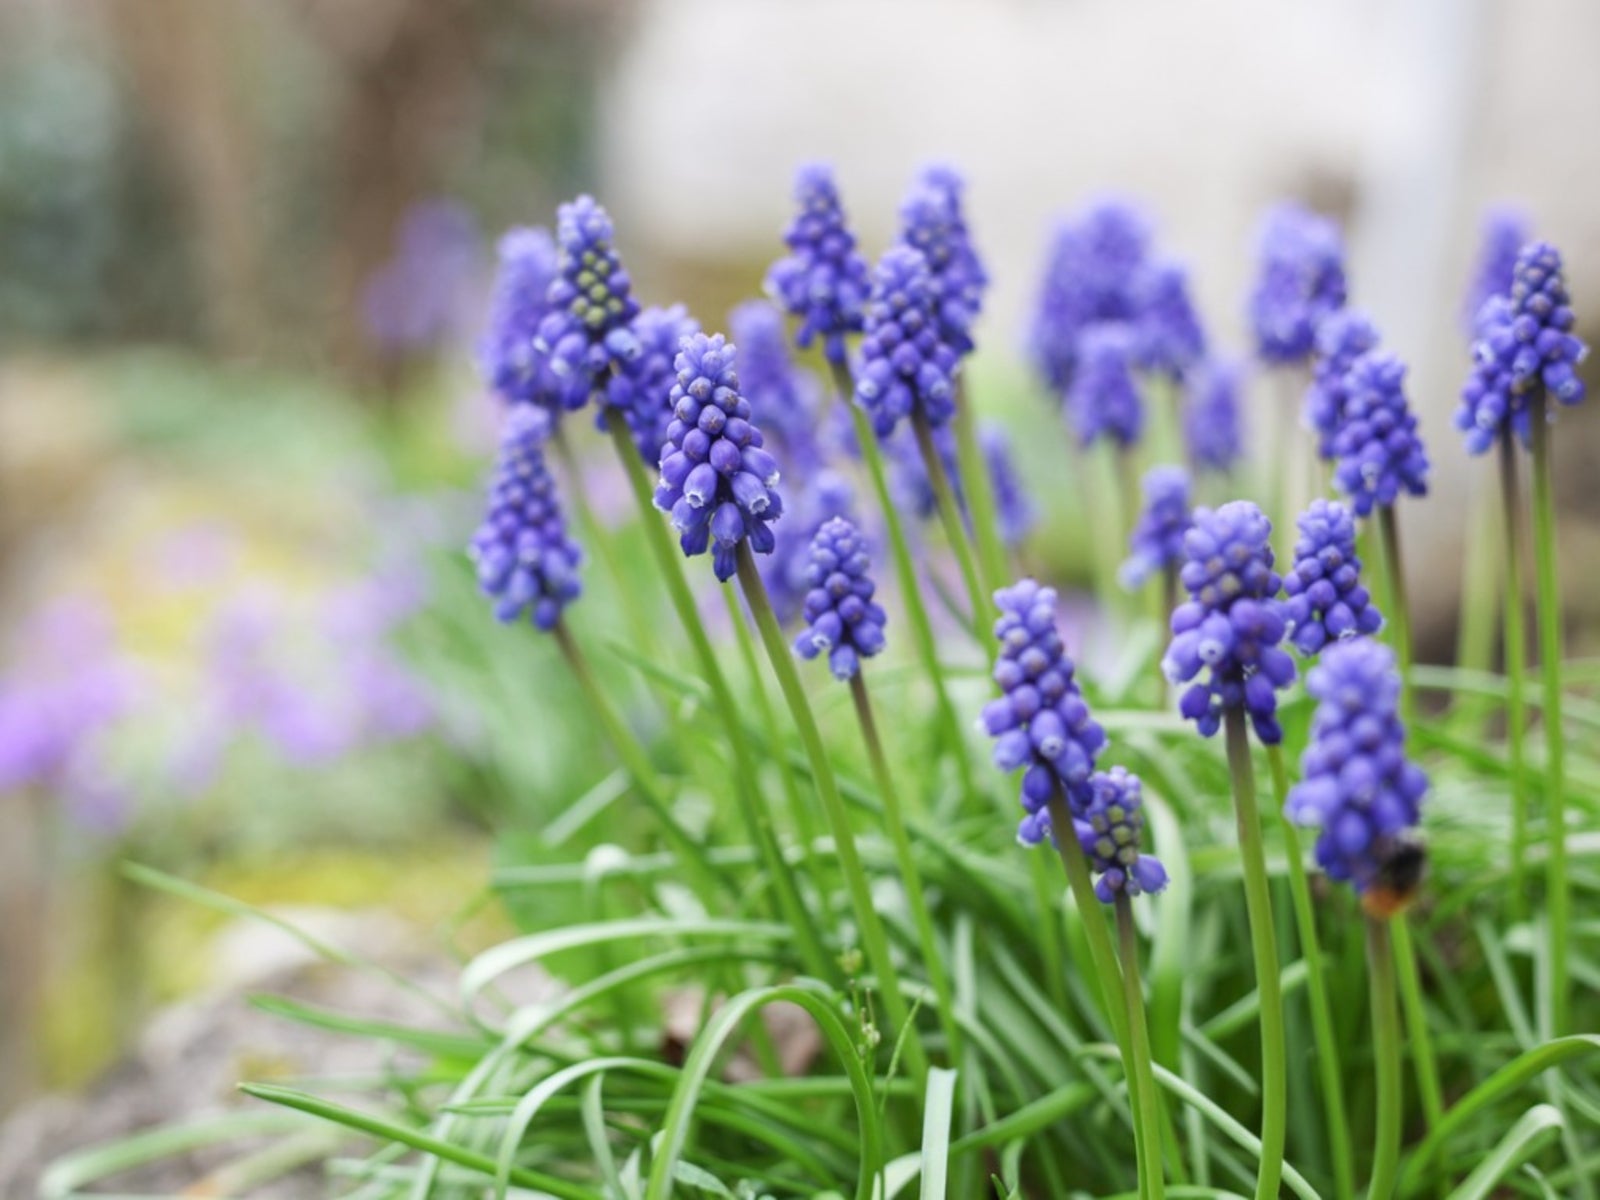 planting grape hyacinths - how to plant and care for grape